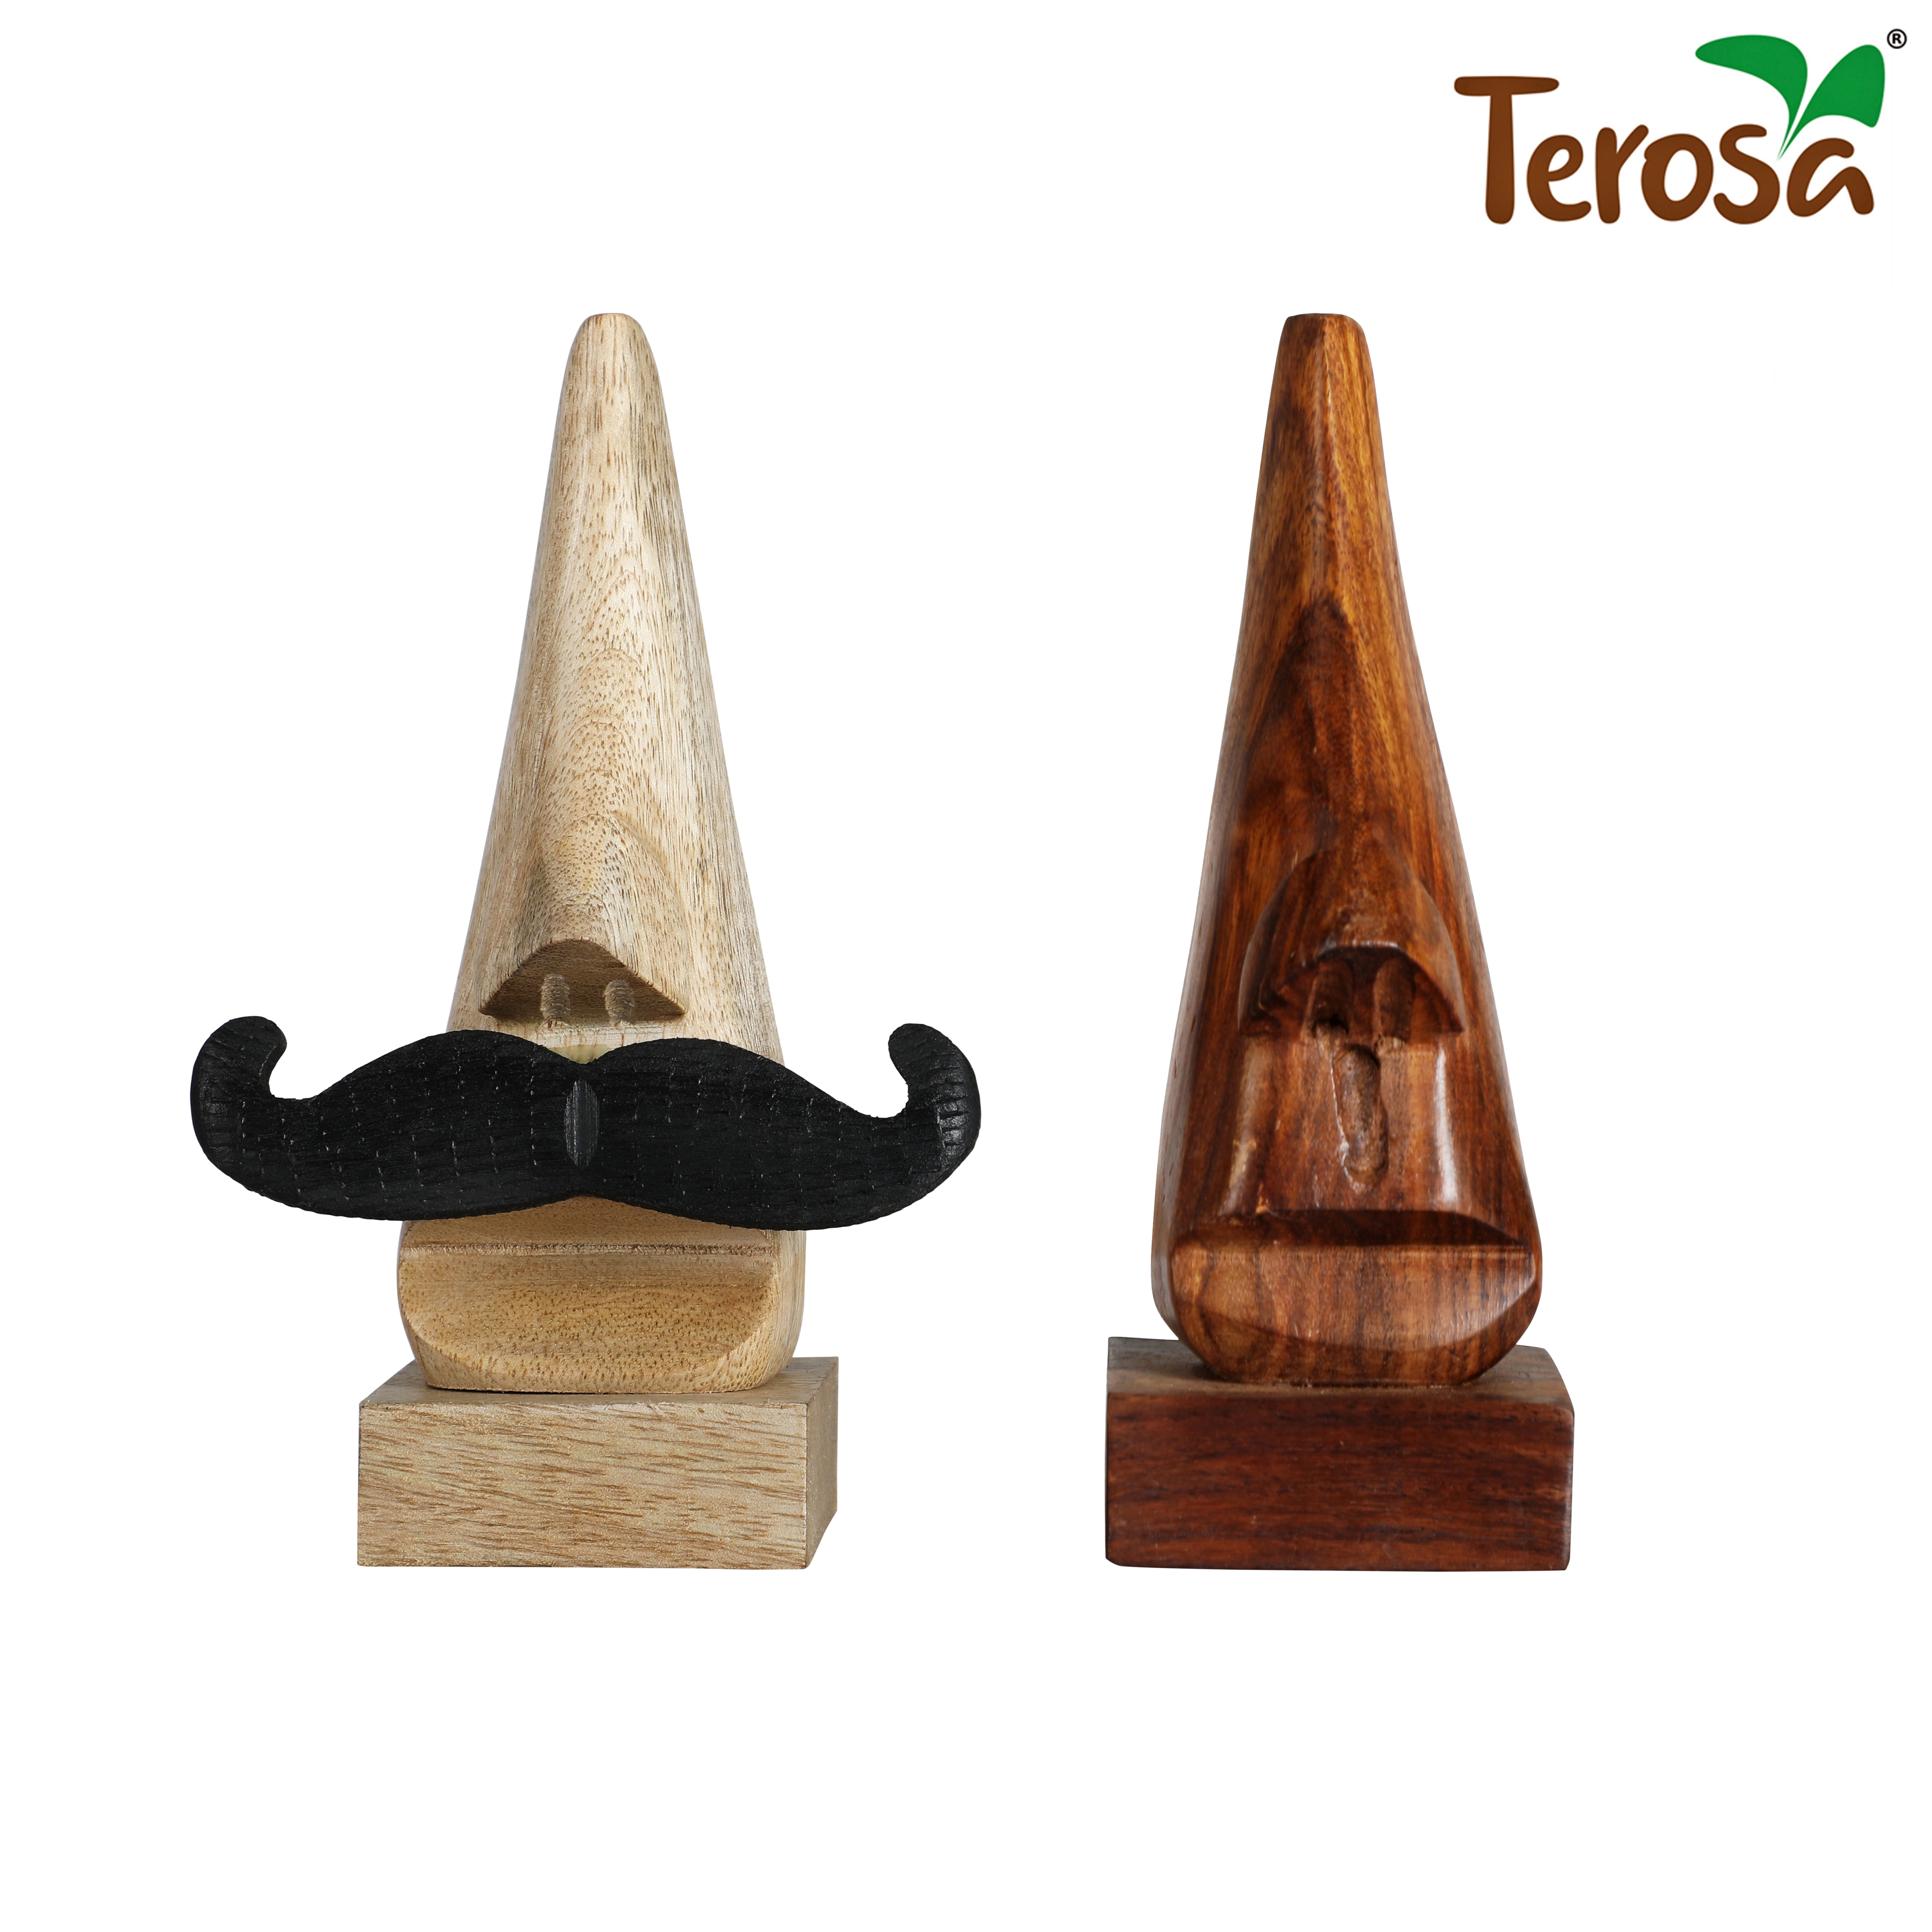 Terosa | Spectacles or Eye-glasses Stand Set - Couple 